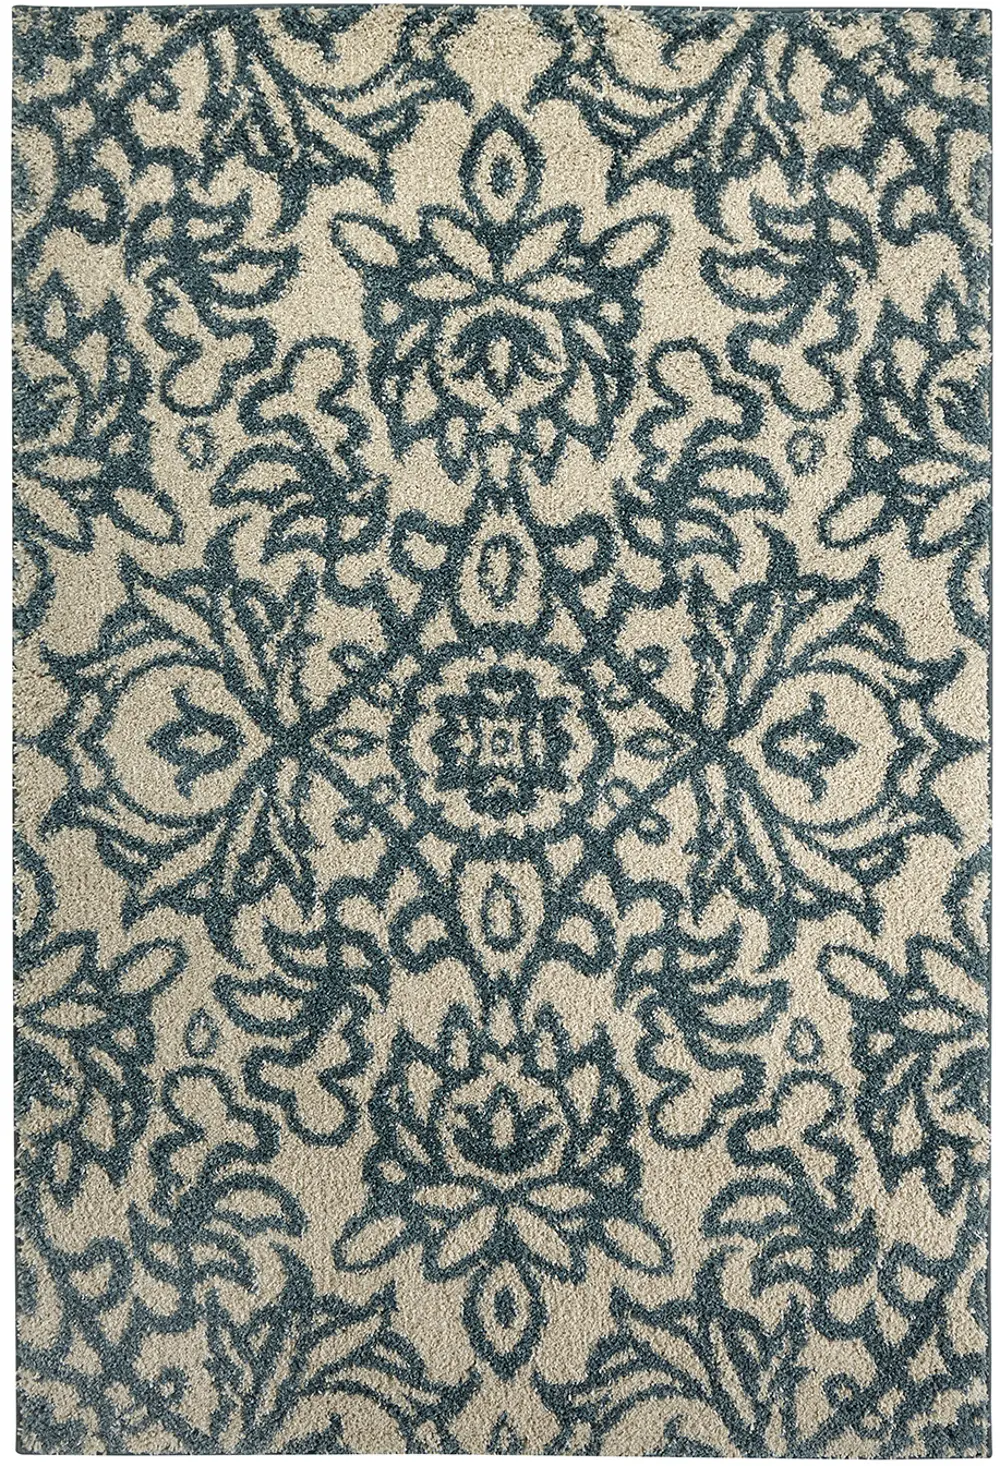 AUGUSTA/90308-880..7 8 x 11 Large Ivory and Blue Rug - Augusta-1